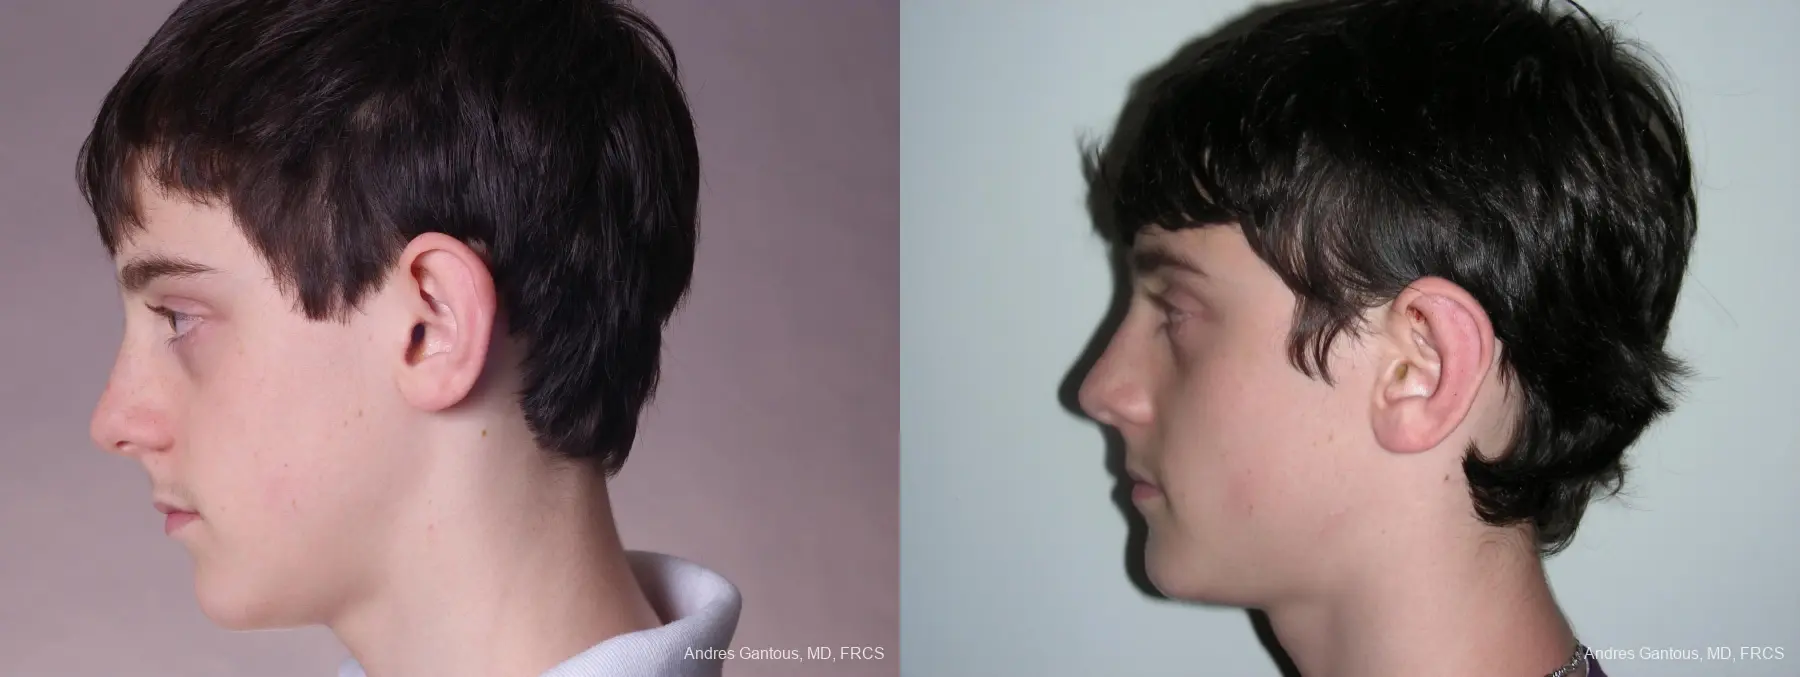 Otoplasty And Earlobe Repair: Patient 3 - Before and After 5